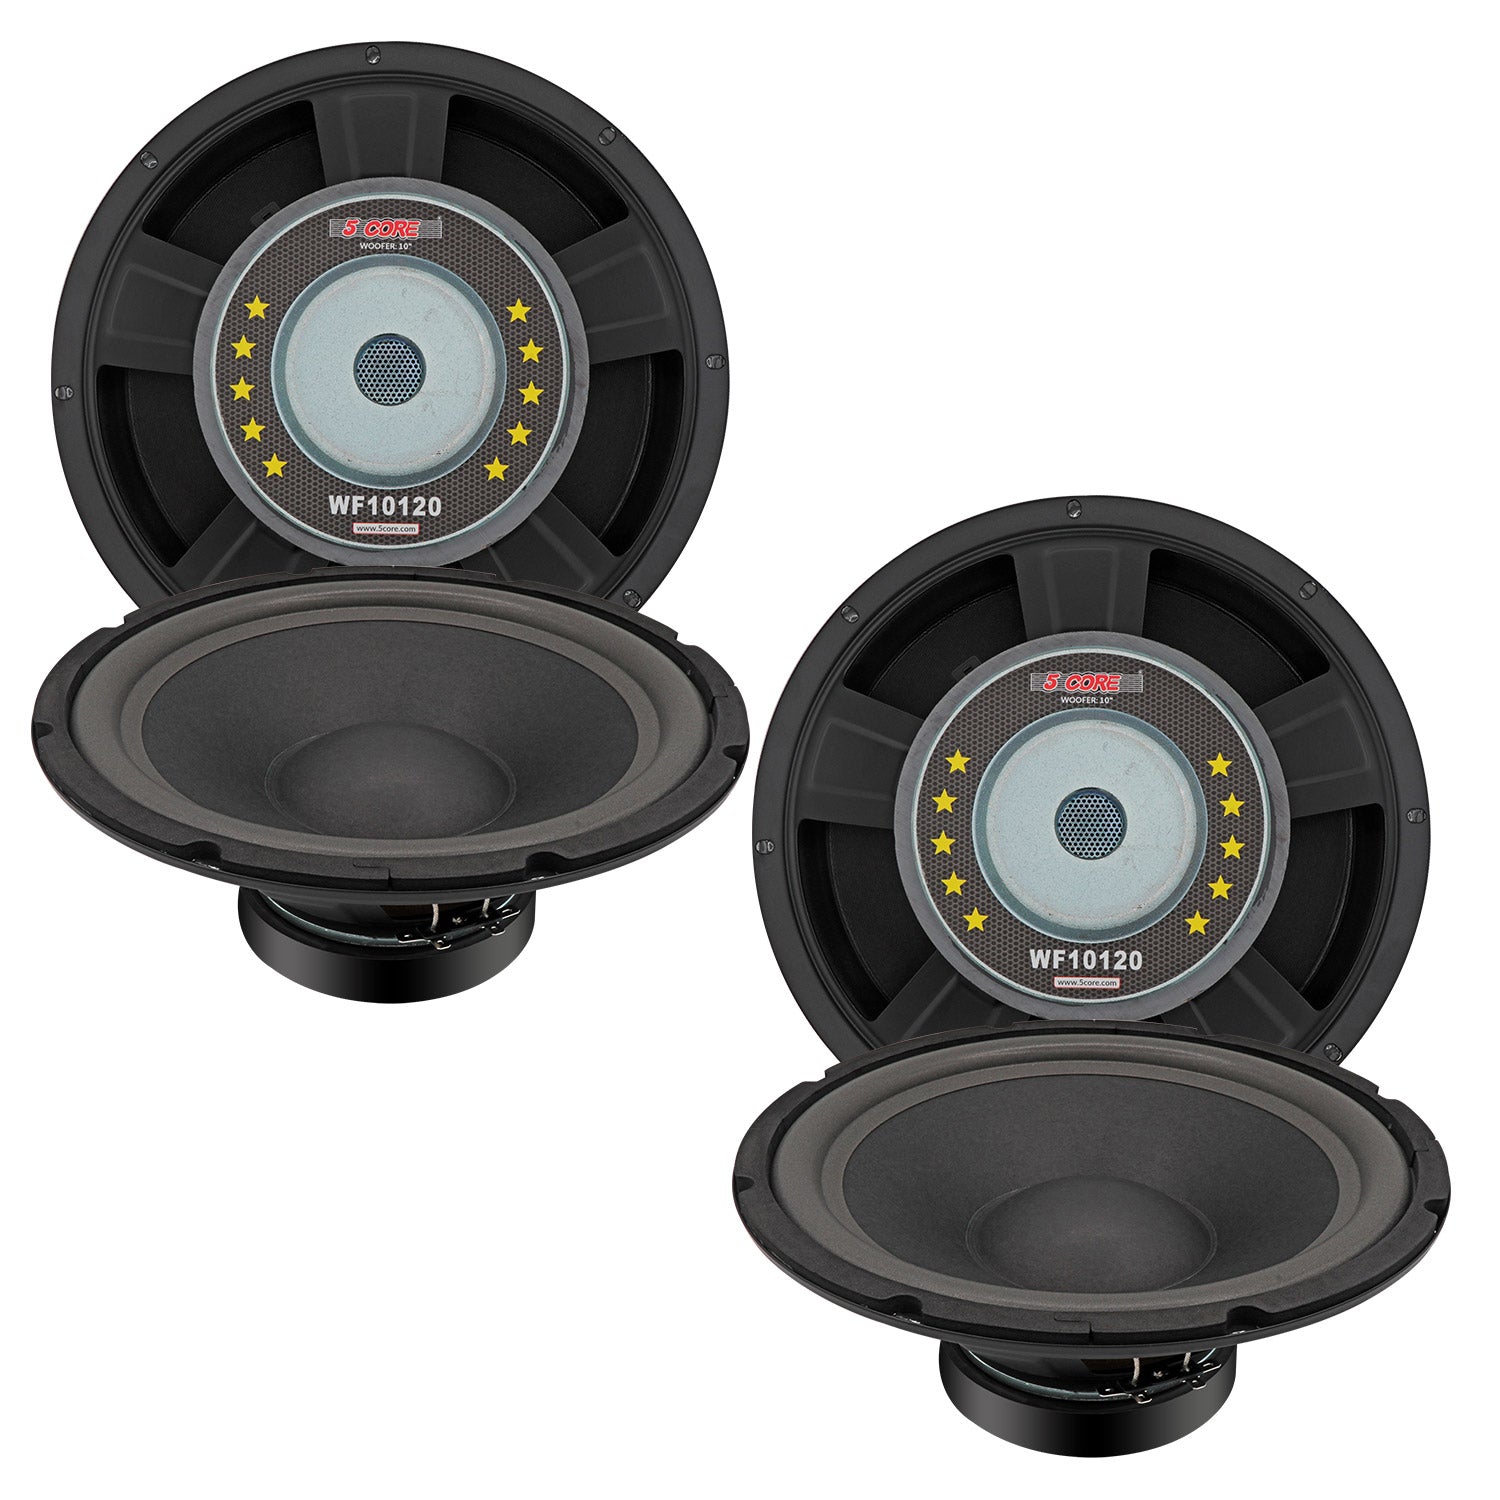 5 Core 10 Inch Subwoofer 2 Pieces 75 Watt RMS Raw Replacement Speaker 8 OHM Sub Woofer System Powerful Bass Surround Sound Stereo Subwoofers w Premium Magnet 1.25 Inch Voice Coil - WF 10120 2PCS